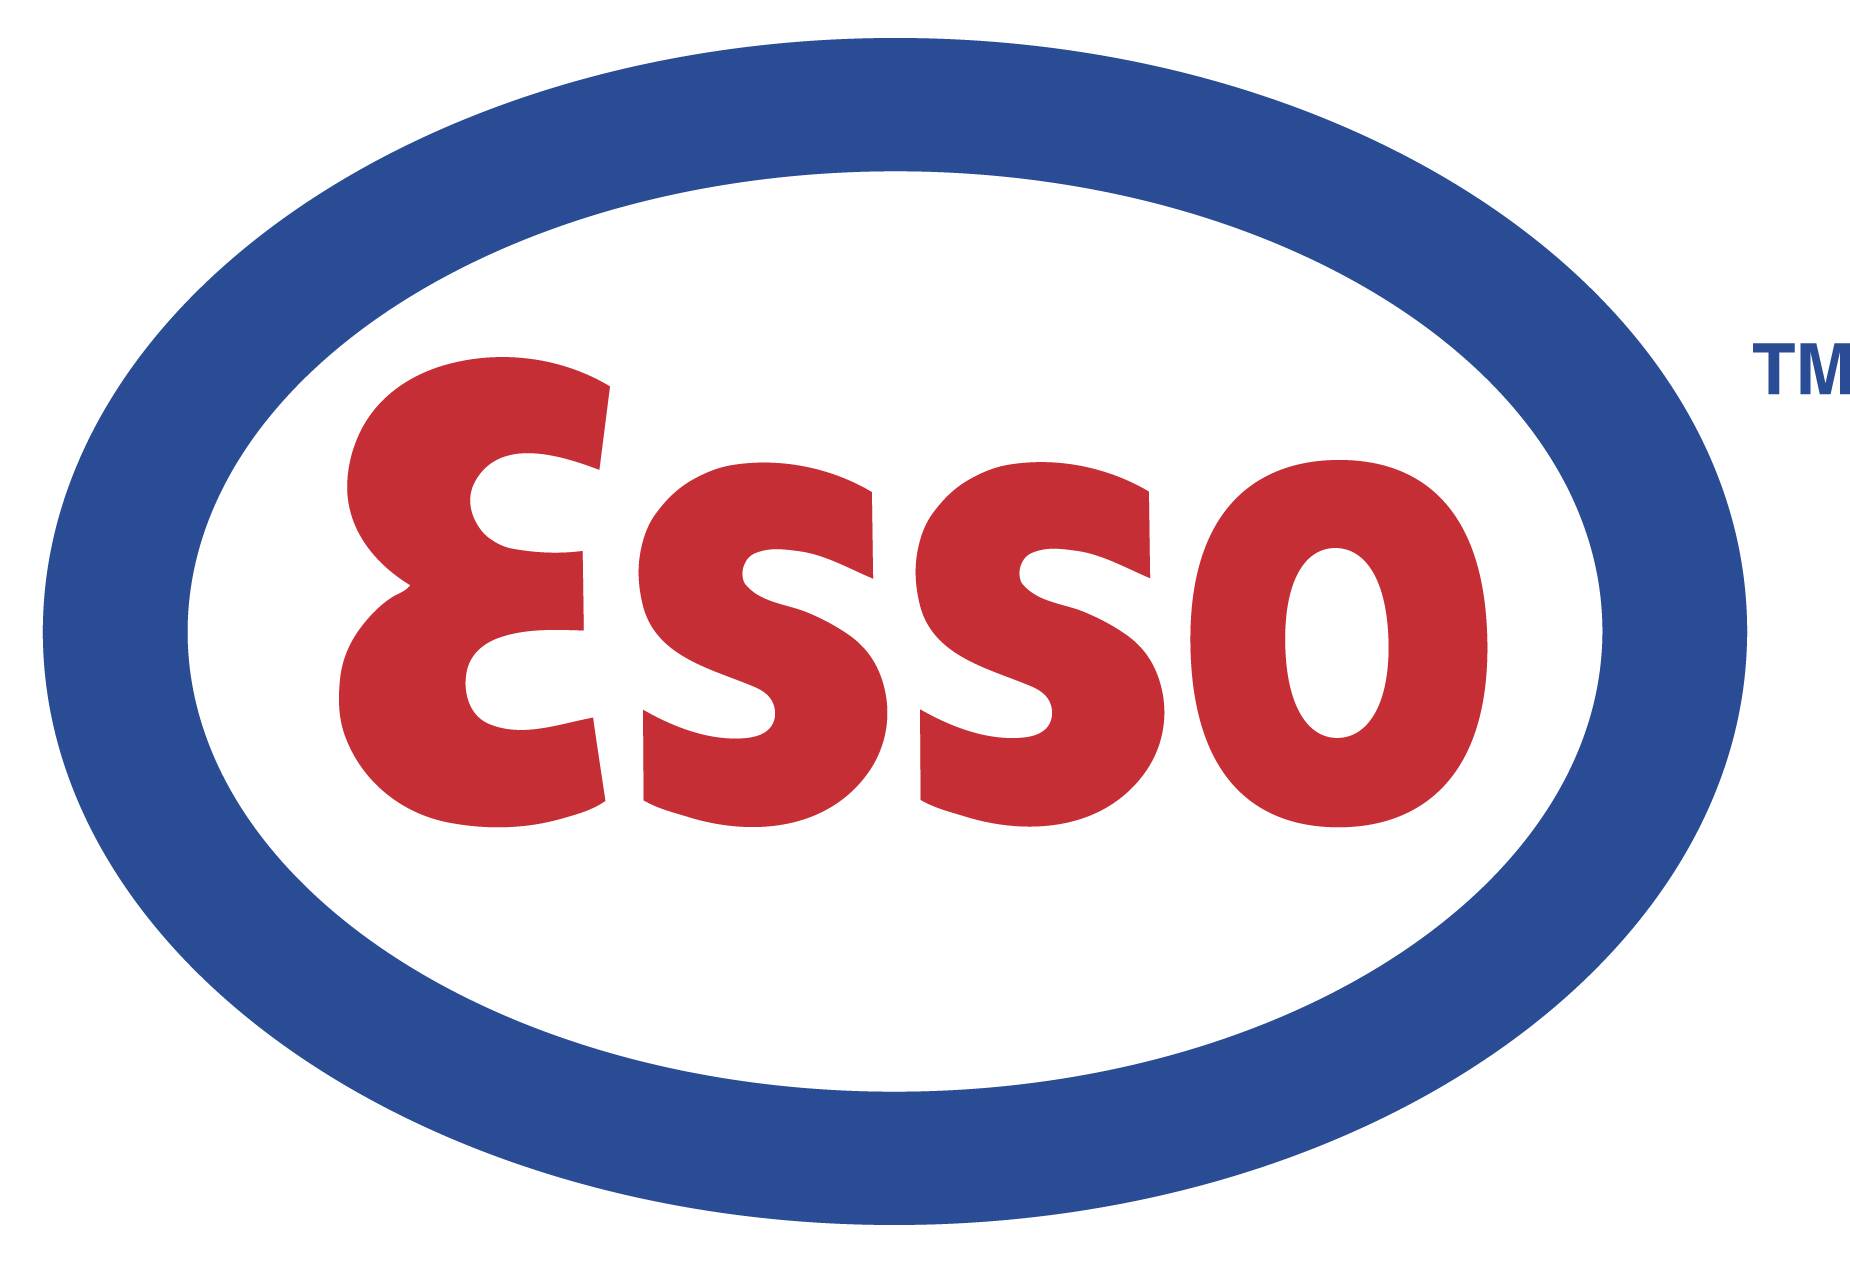 Marketed around the world, including in Hong Kong, Esso is known for its high-quality fuels.